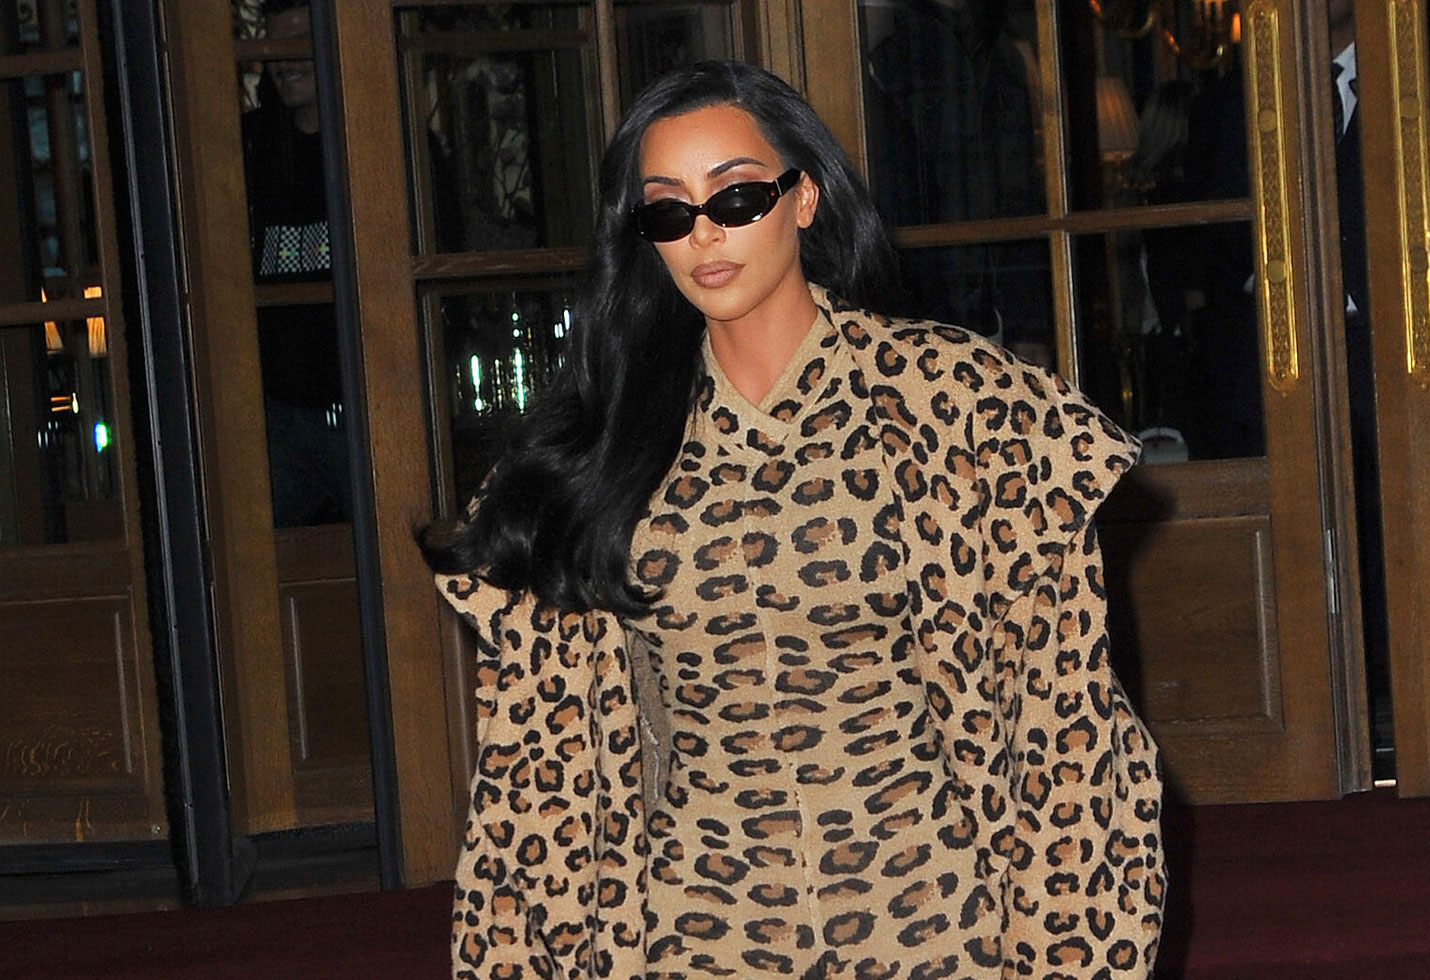 Kim Kardashian Returns To Paris In Leopard Catsuit With Heavy Security